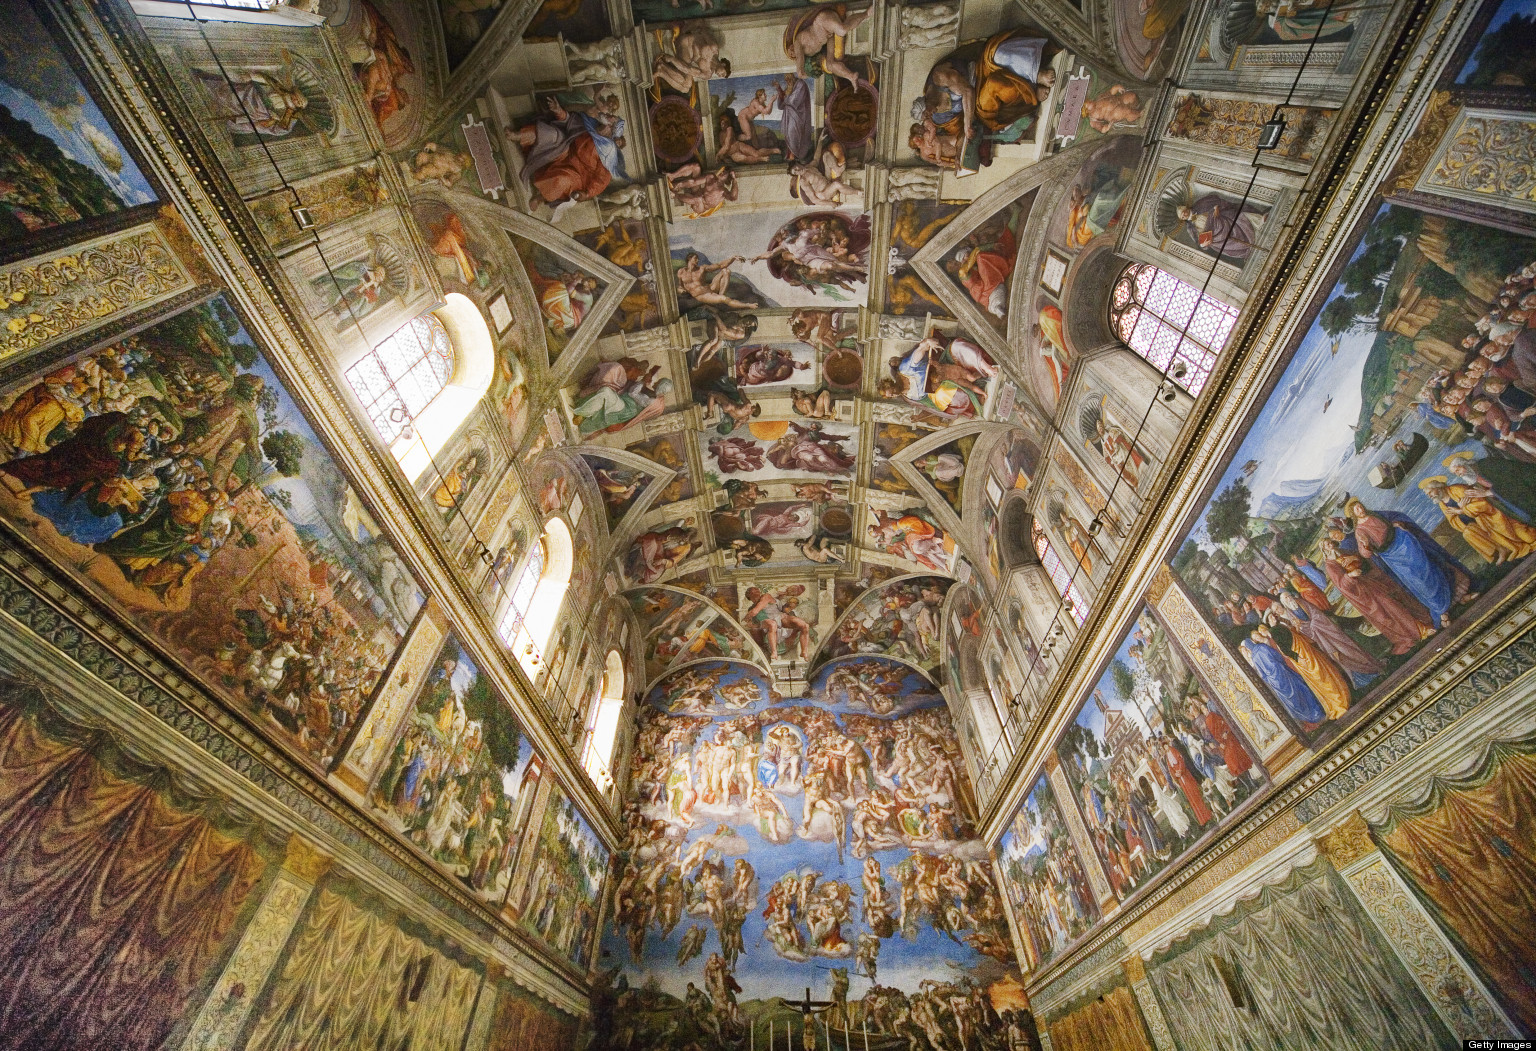 Hey, We Bet You Can’t Get Better Than 80% On This Random Knowledge Quiz Sistine Chapel fresco